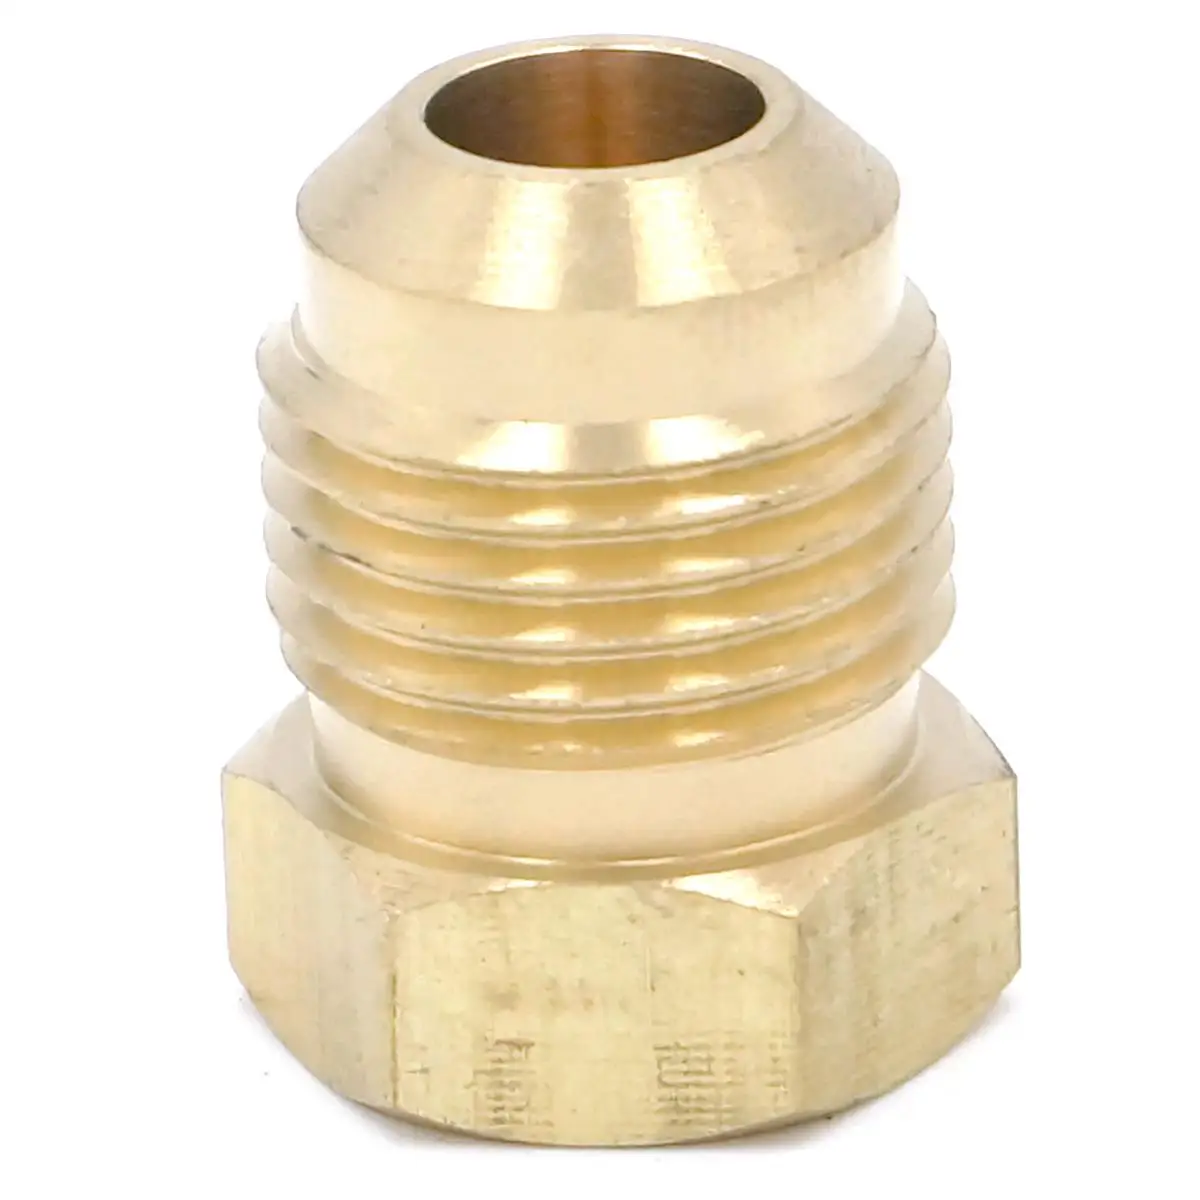 Fit Tube OD 3/8" End Plug Brass SAE 45 Degree Pipe Fitting Connector 